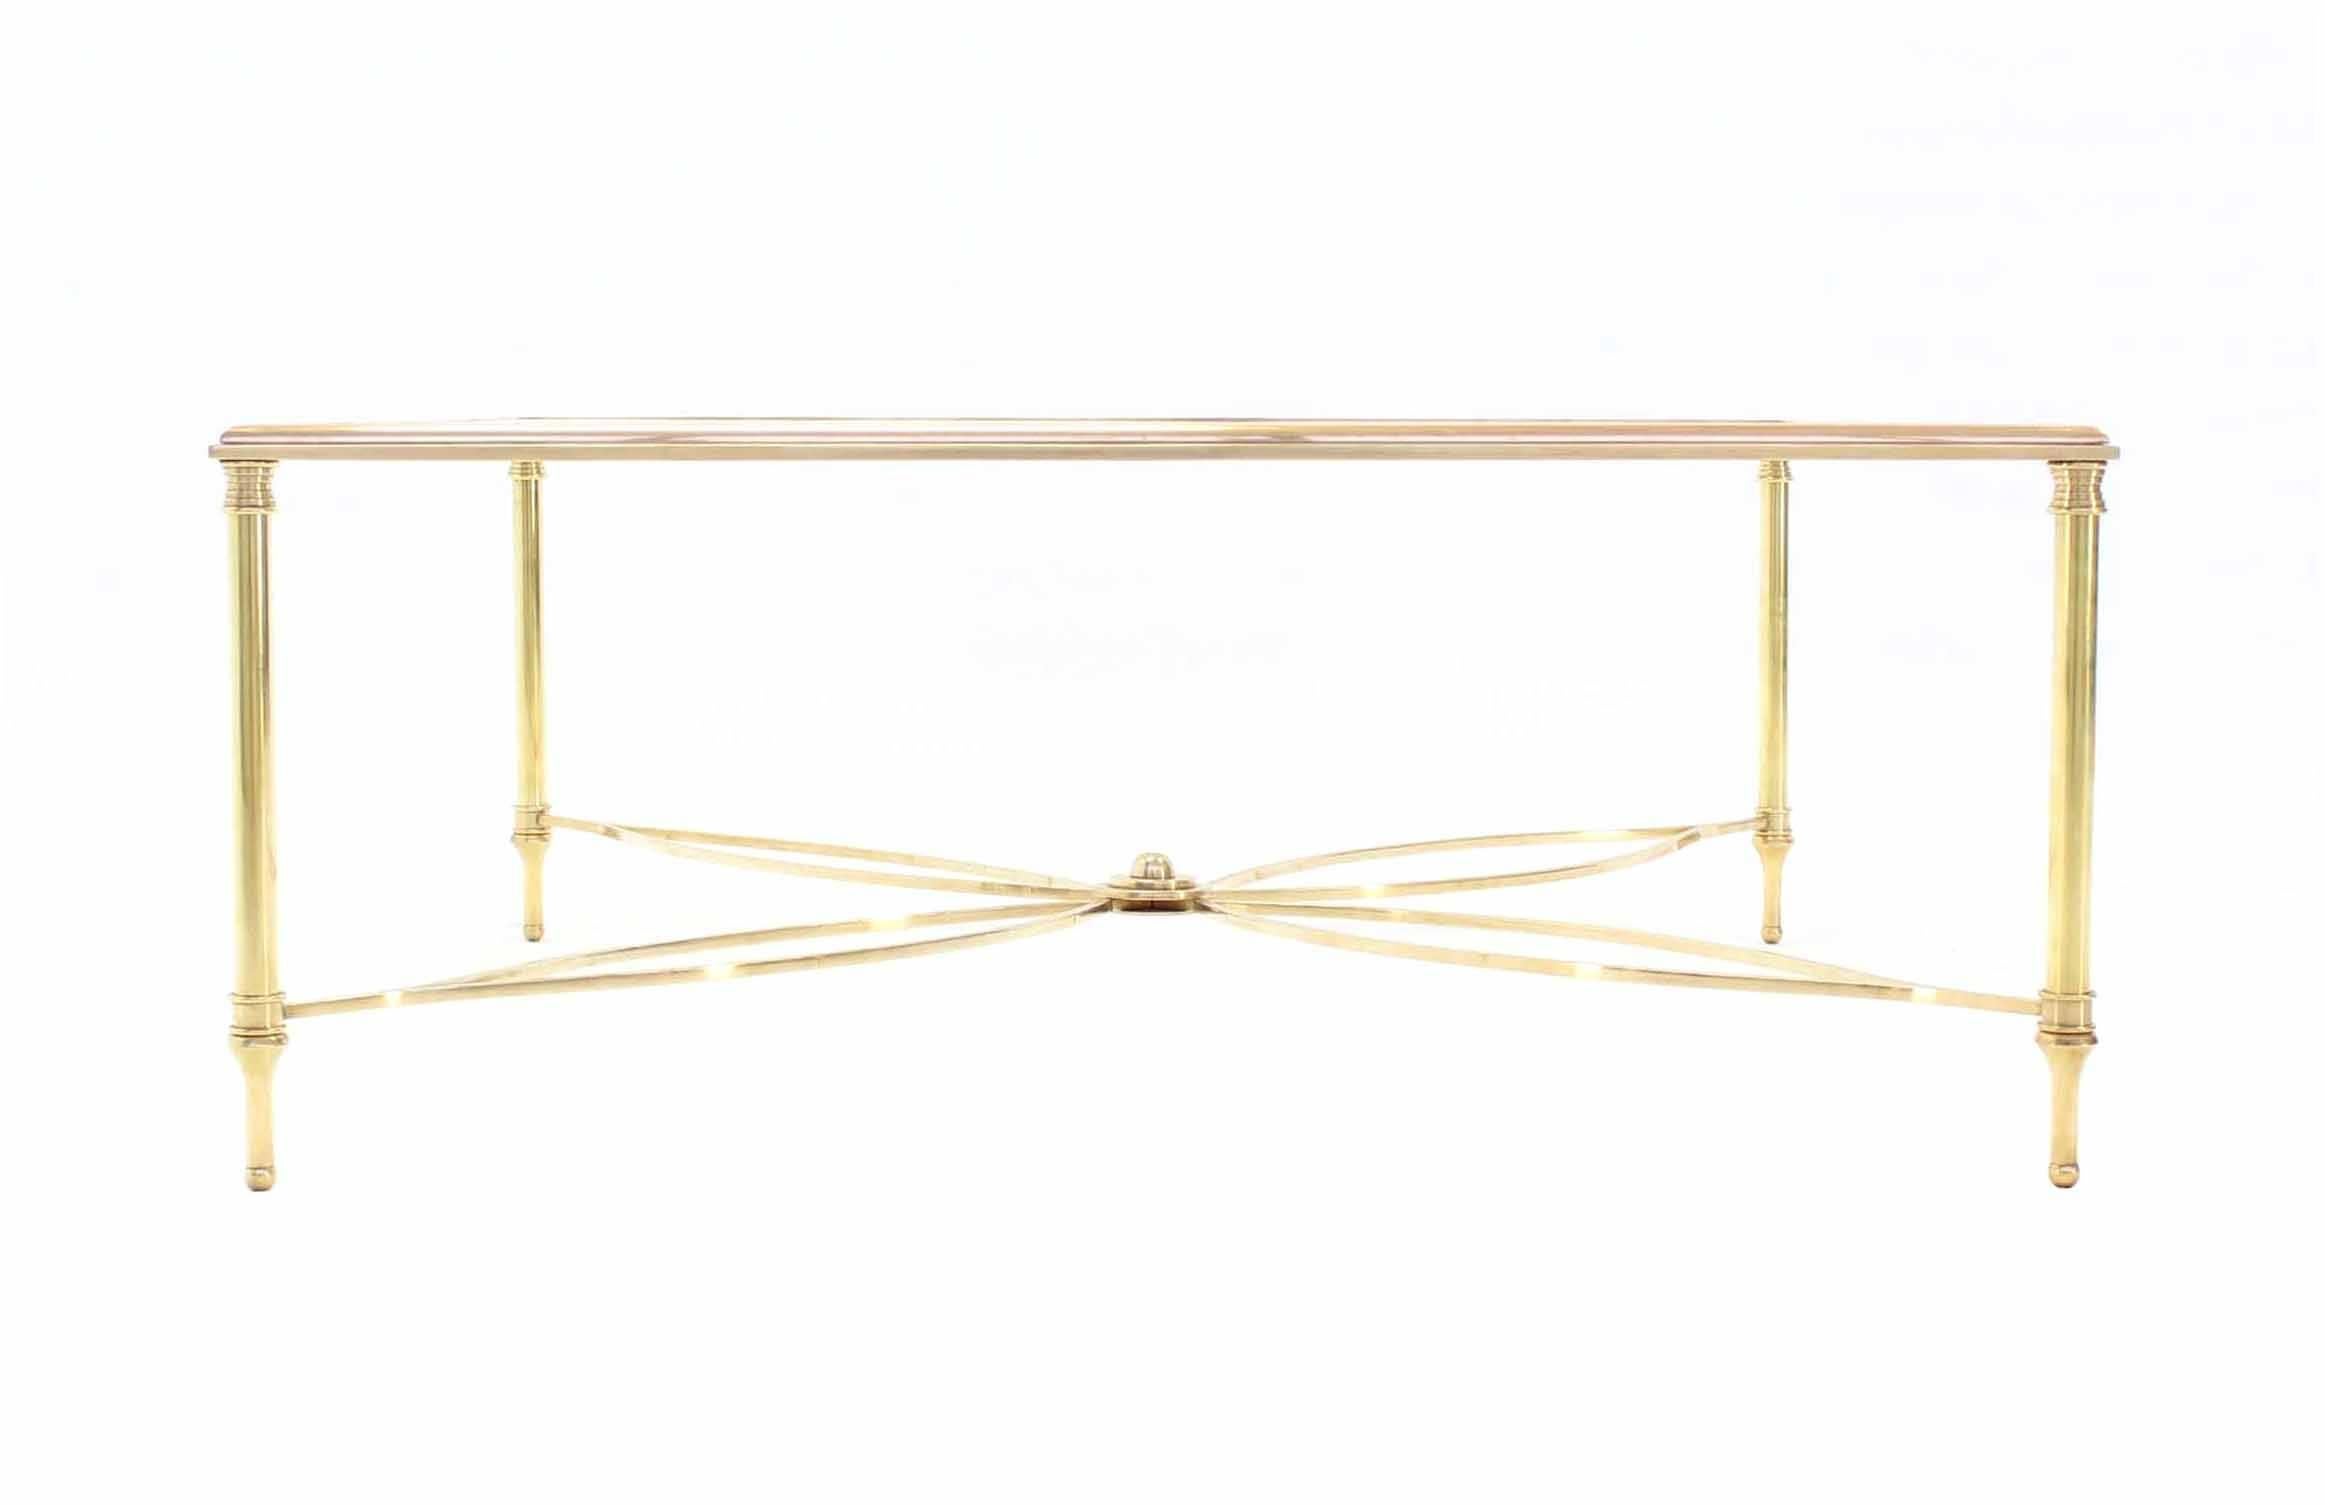 Large Square Brass Coffee Table w/ Lotus Like Base Stretcher In Excellent Condition For Sale In Rockaway, NJ